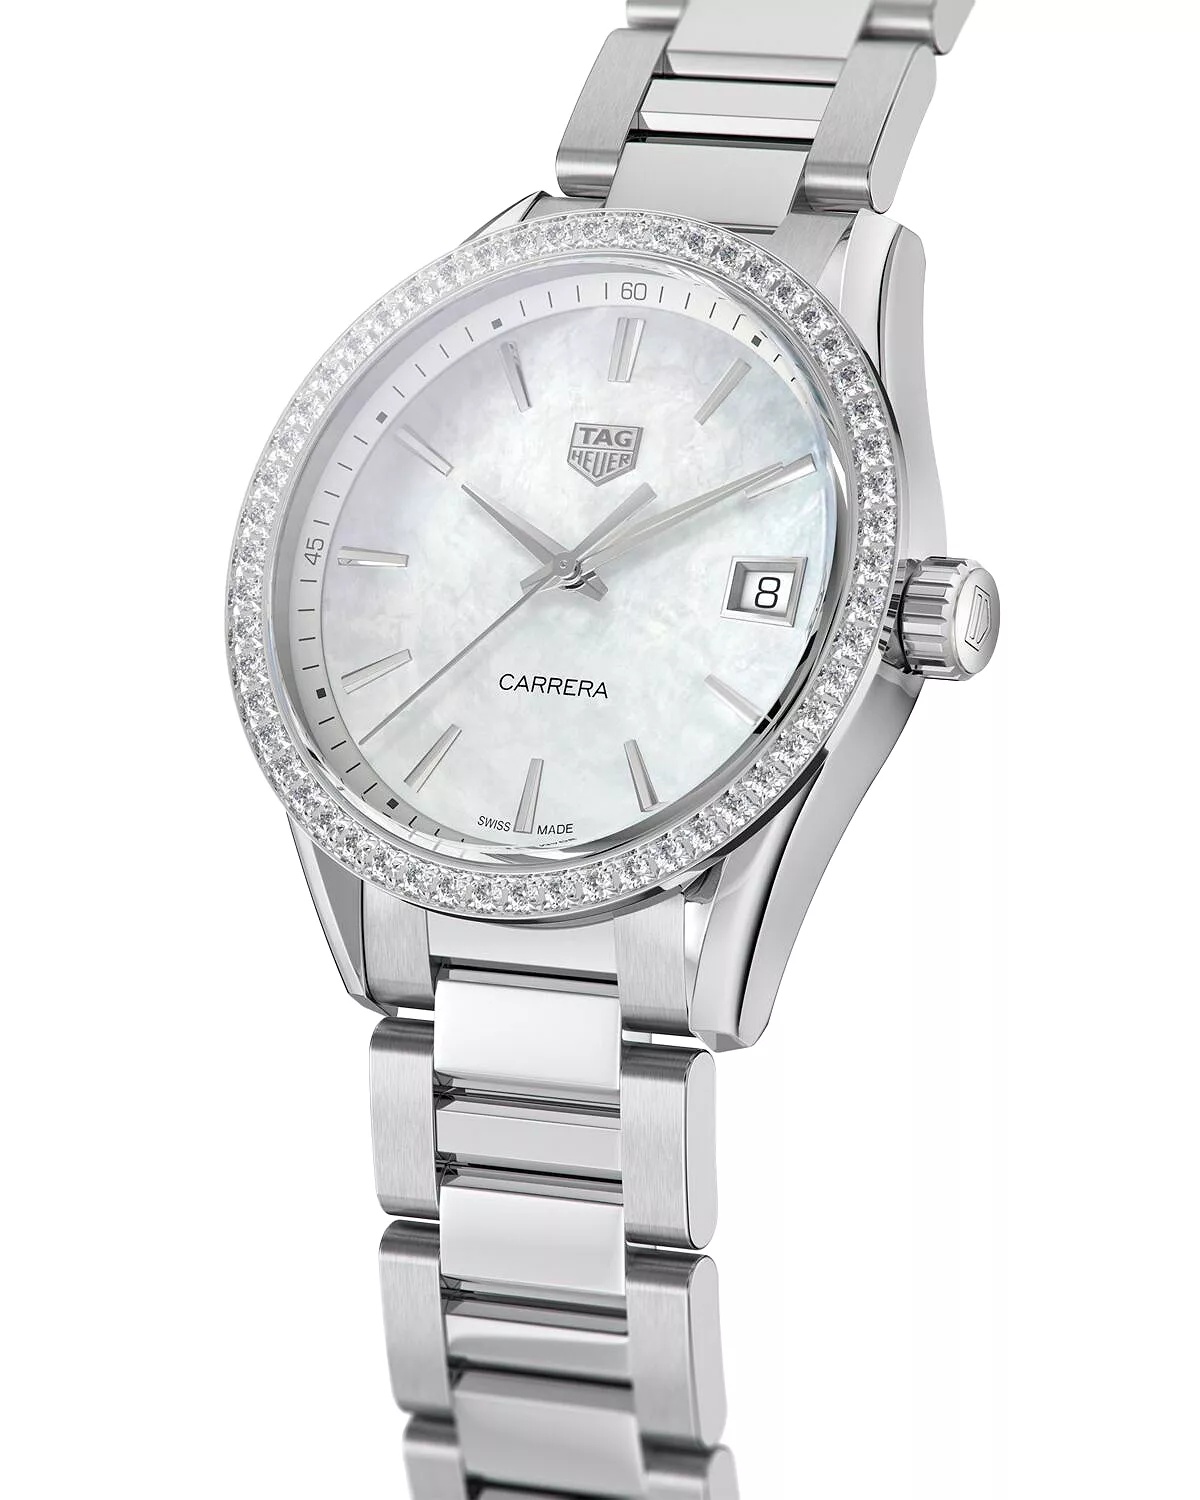 Carrera Stainless Steel and White Mother of Pearl Dial Watch with Diamond Bezel Case, 36mm - 3